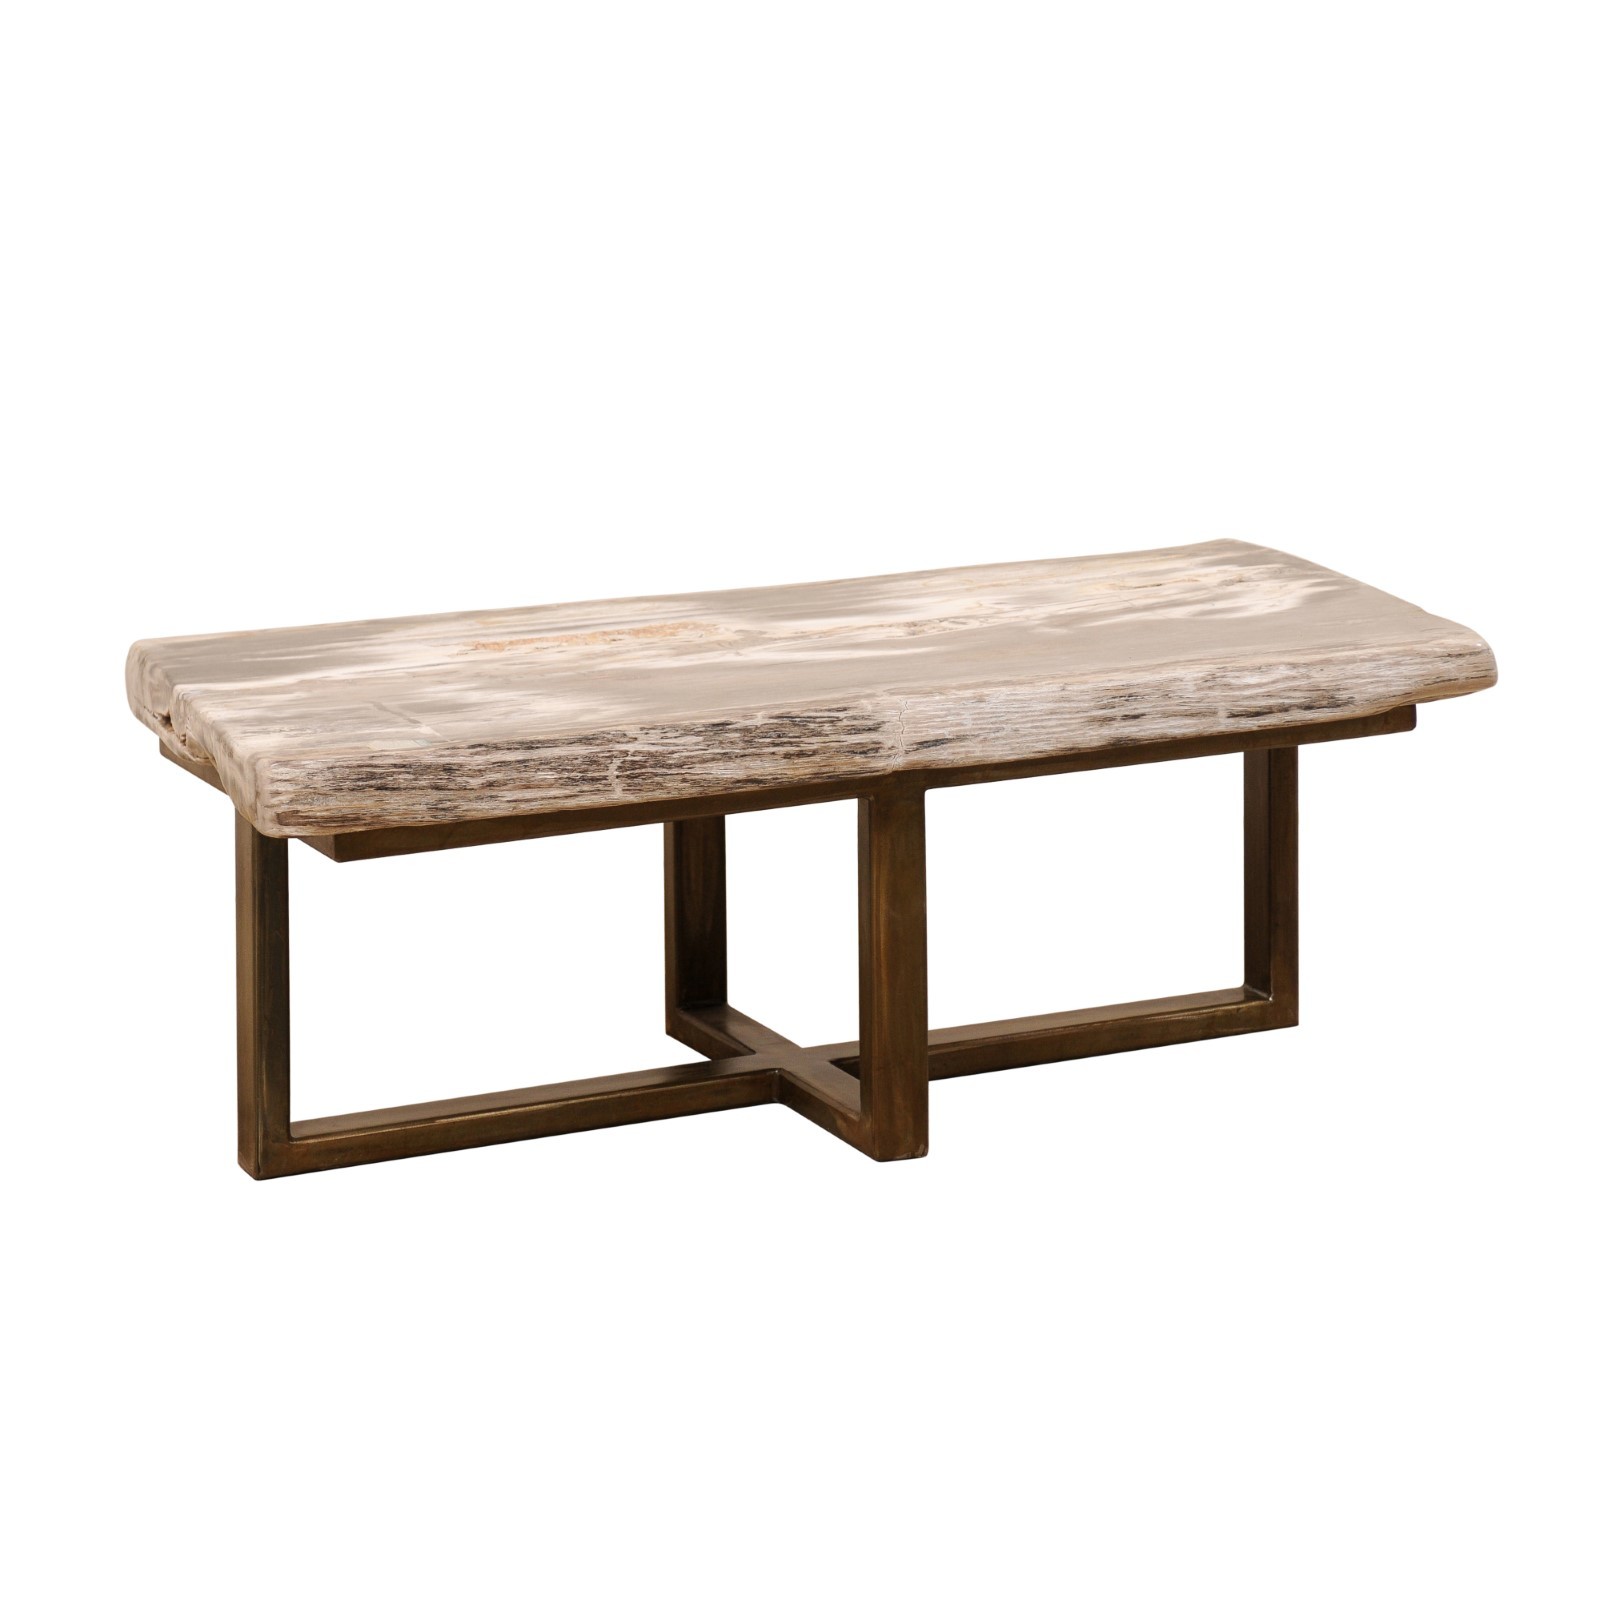 Petrified Wood Coffee Table (or Bench)